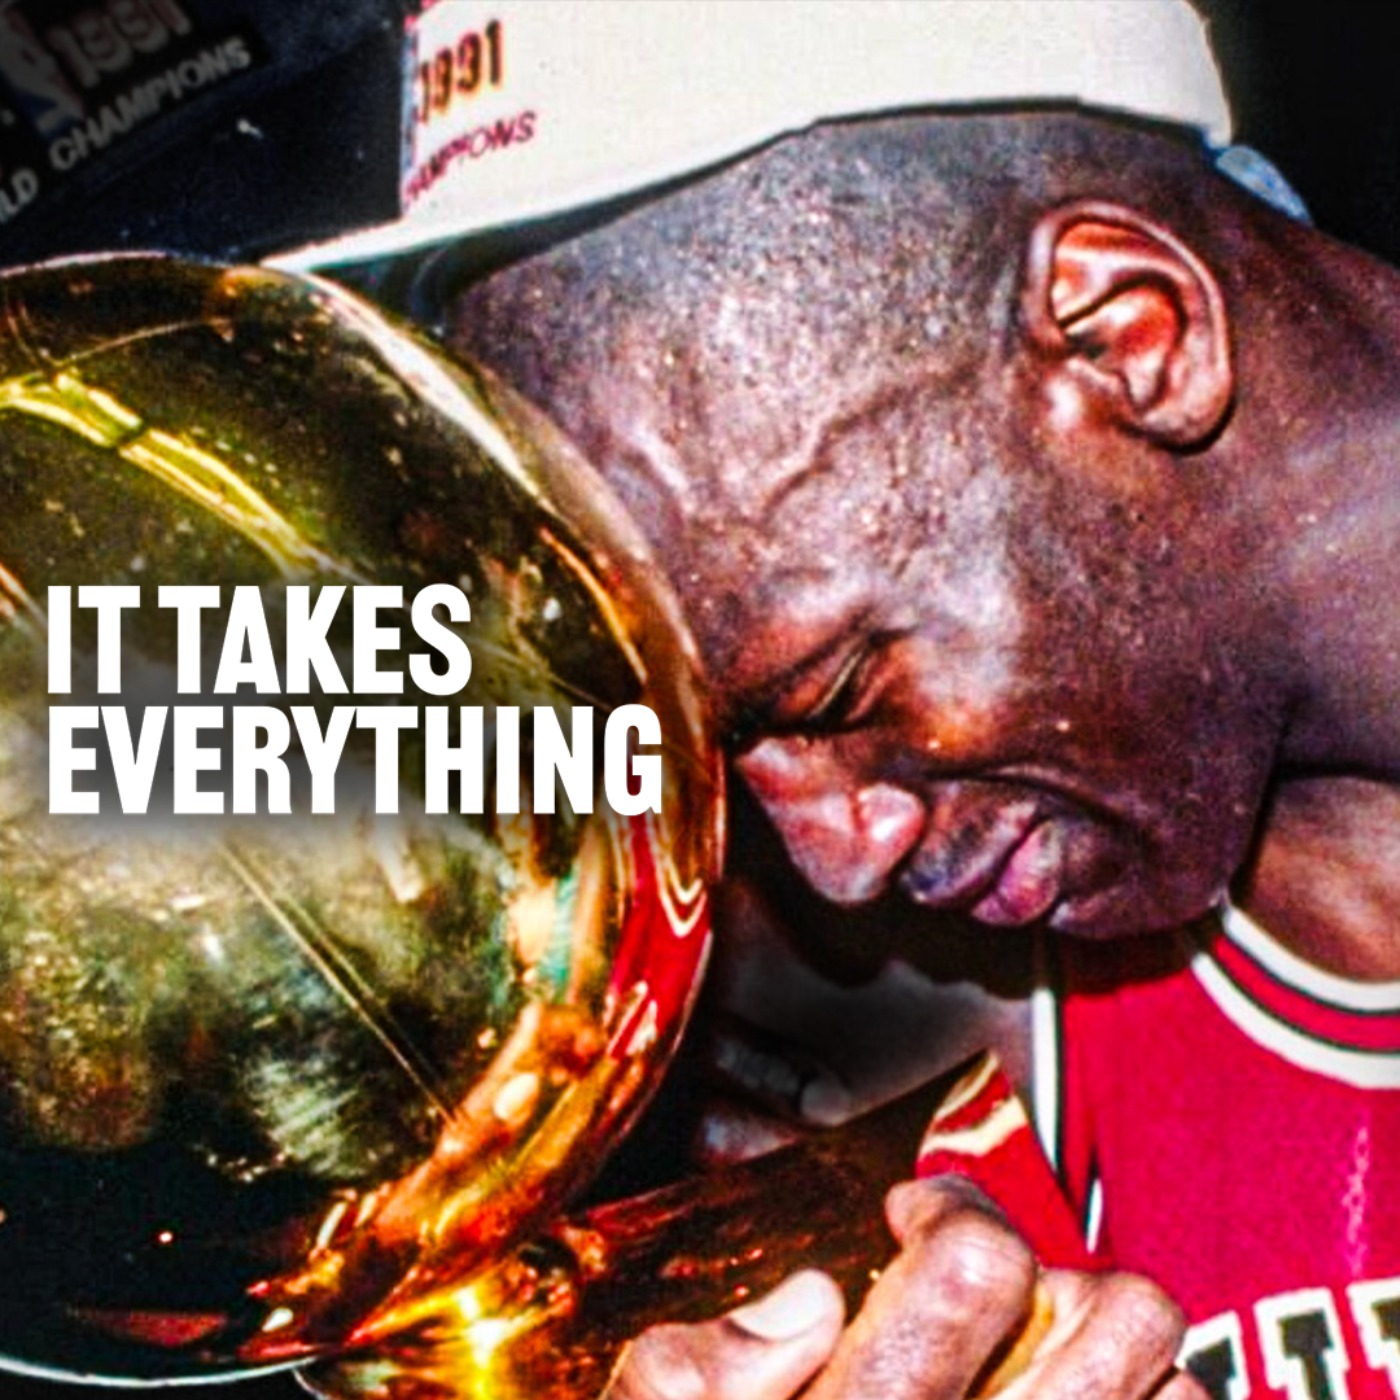 IT TAKES EVERYTHING - Best Motivational Speech featuring Kobe Bryant's Trainer Tim Grover)